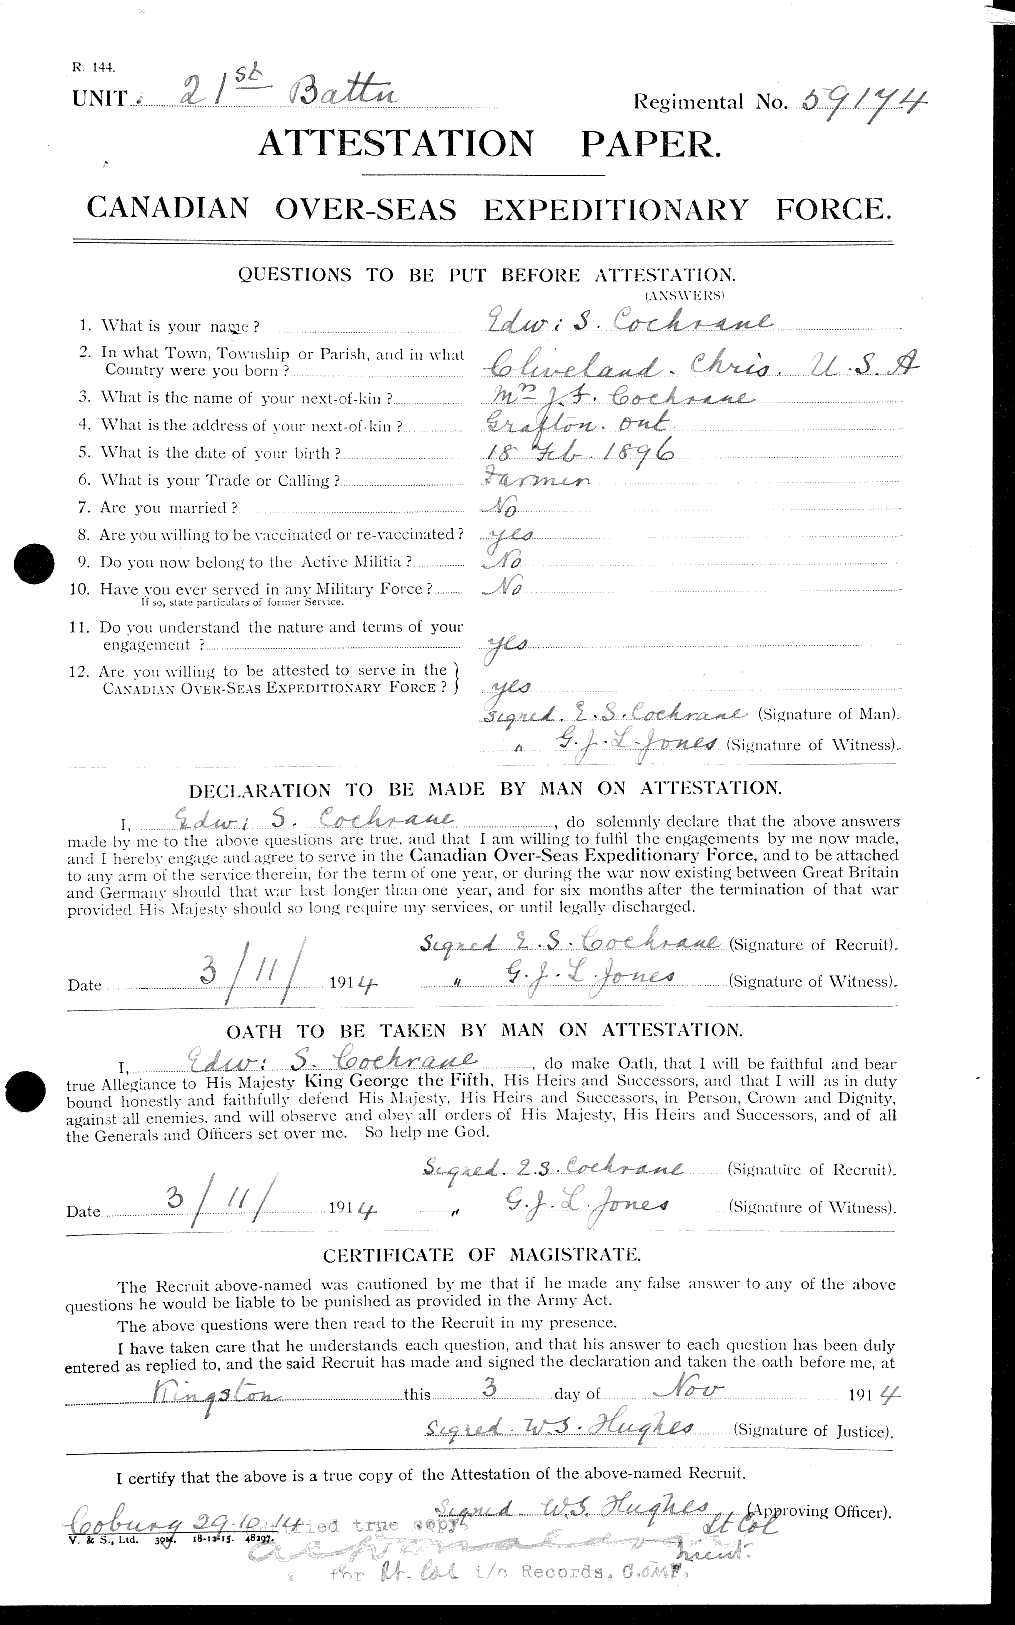 Personnel Records of the First World War - CEF 026333a